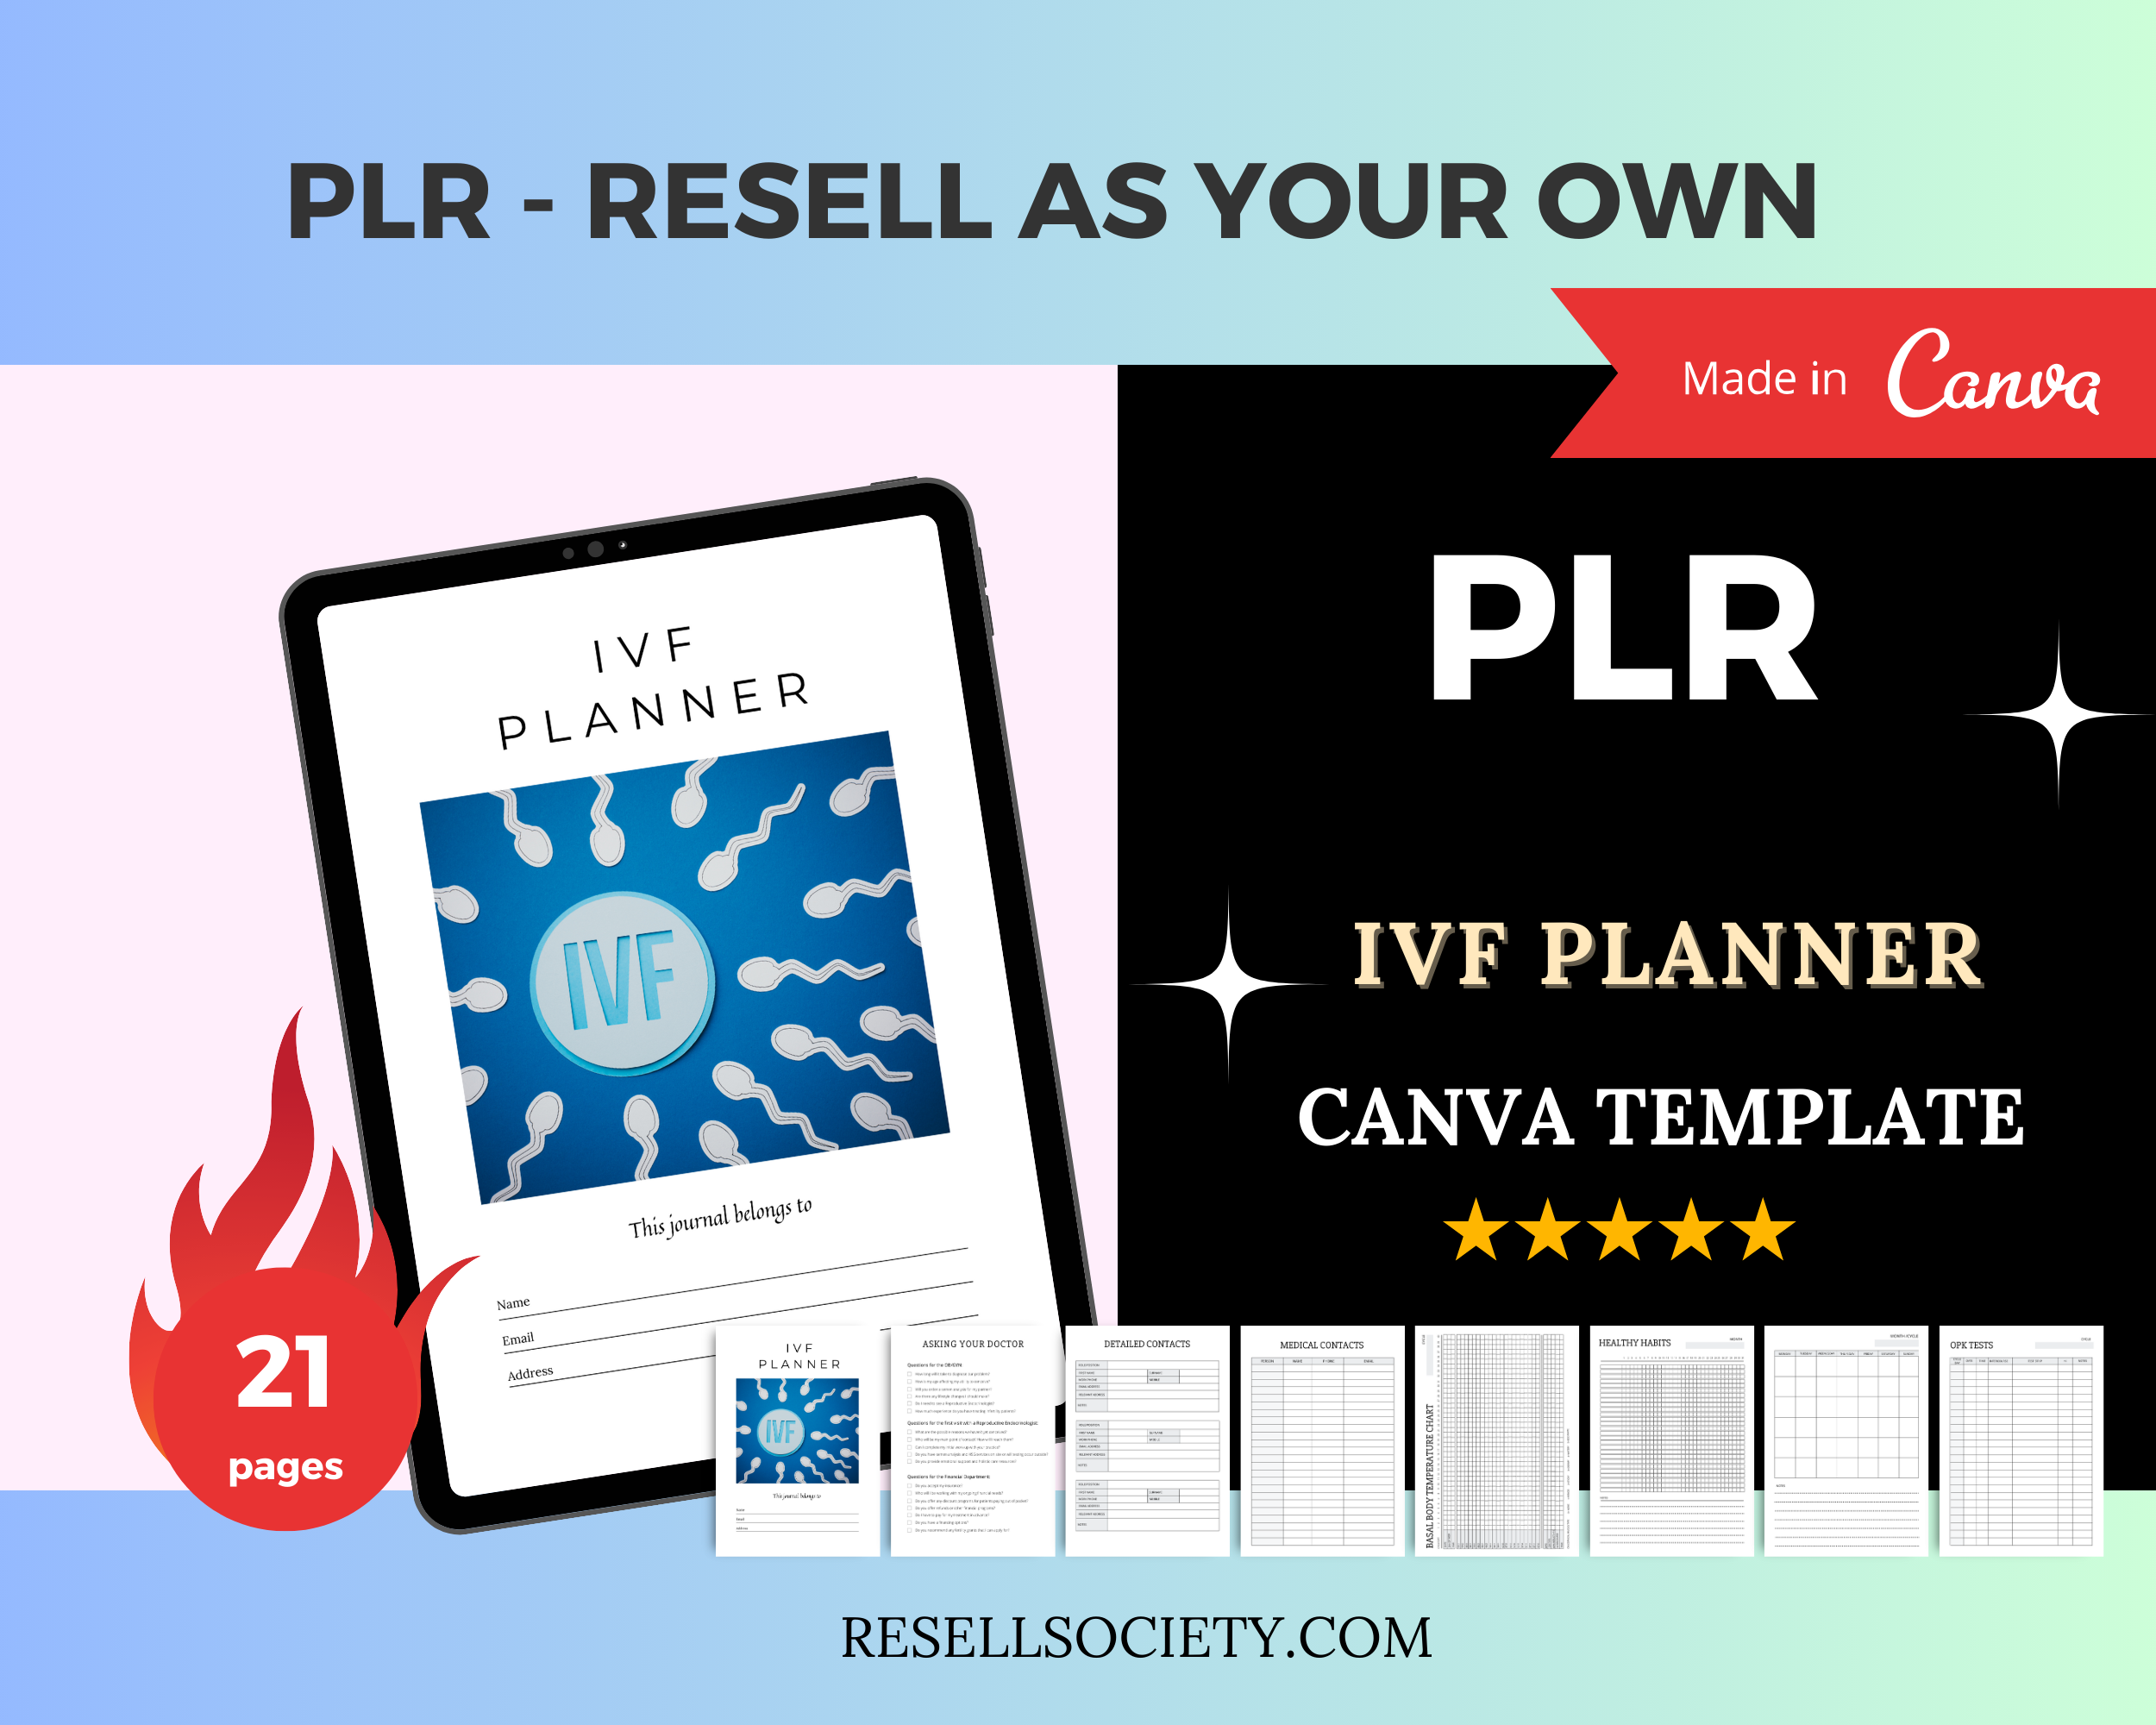 Editable IVF Planner Templates in Canva | Commercial Use